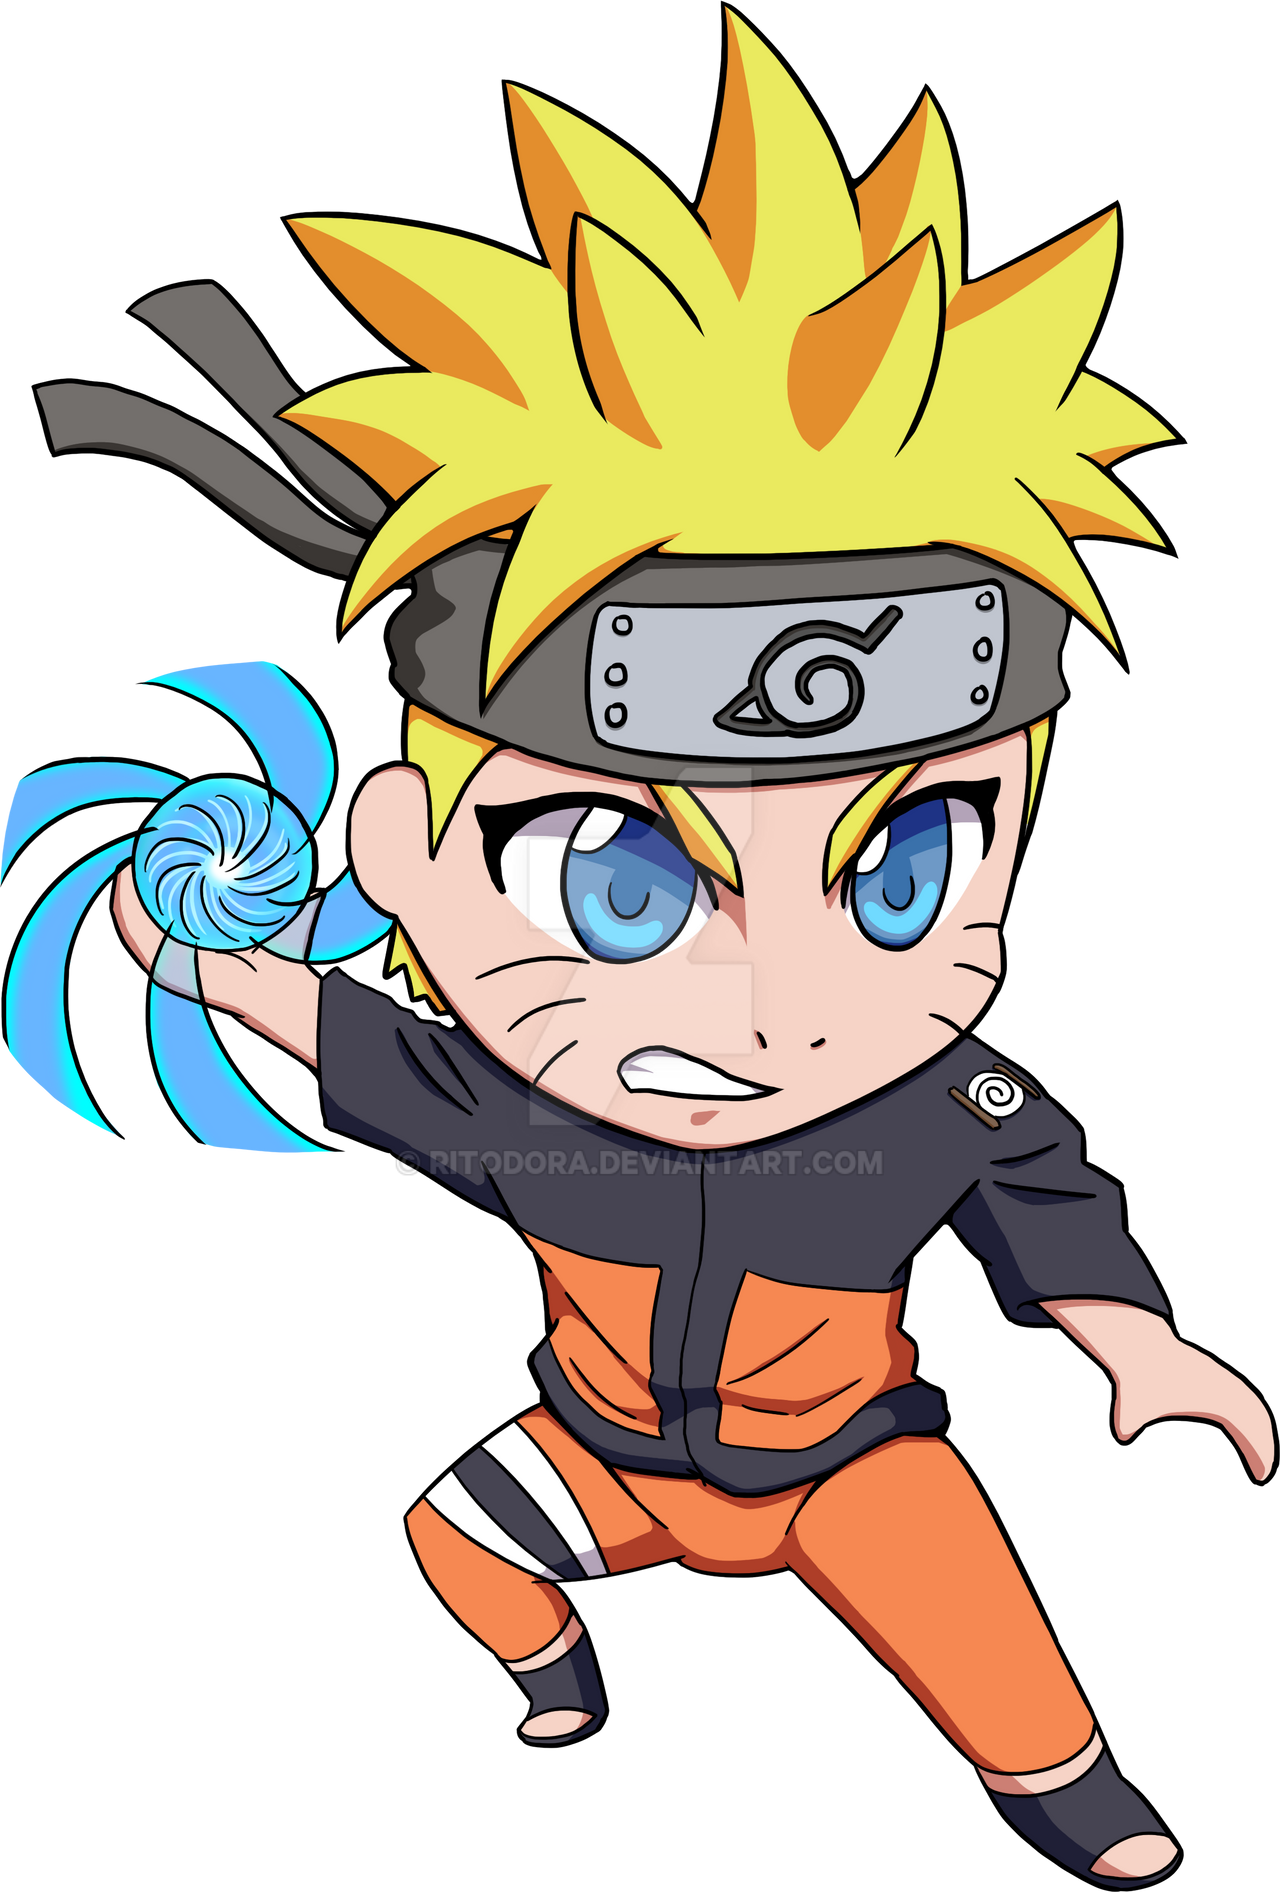 Cute Naruto stickers and other products design by Ritodora on ...